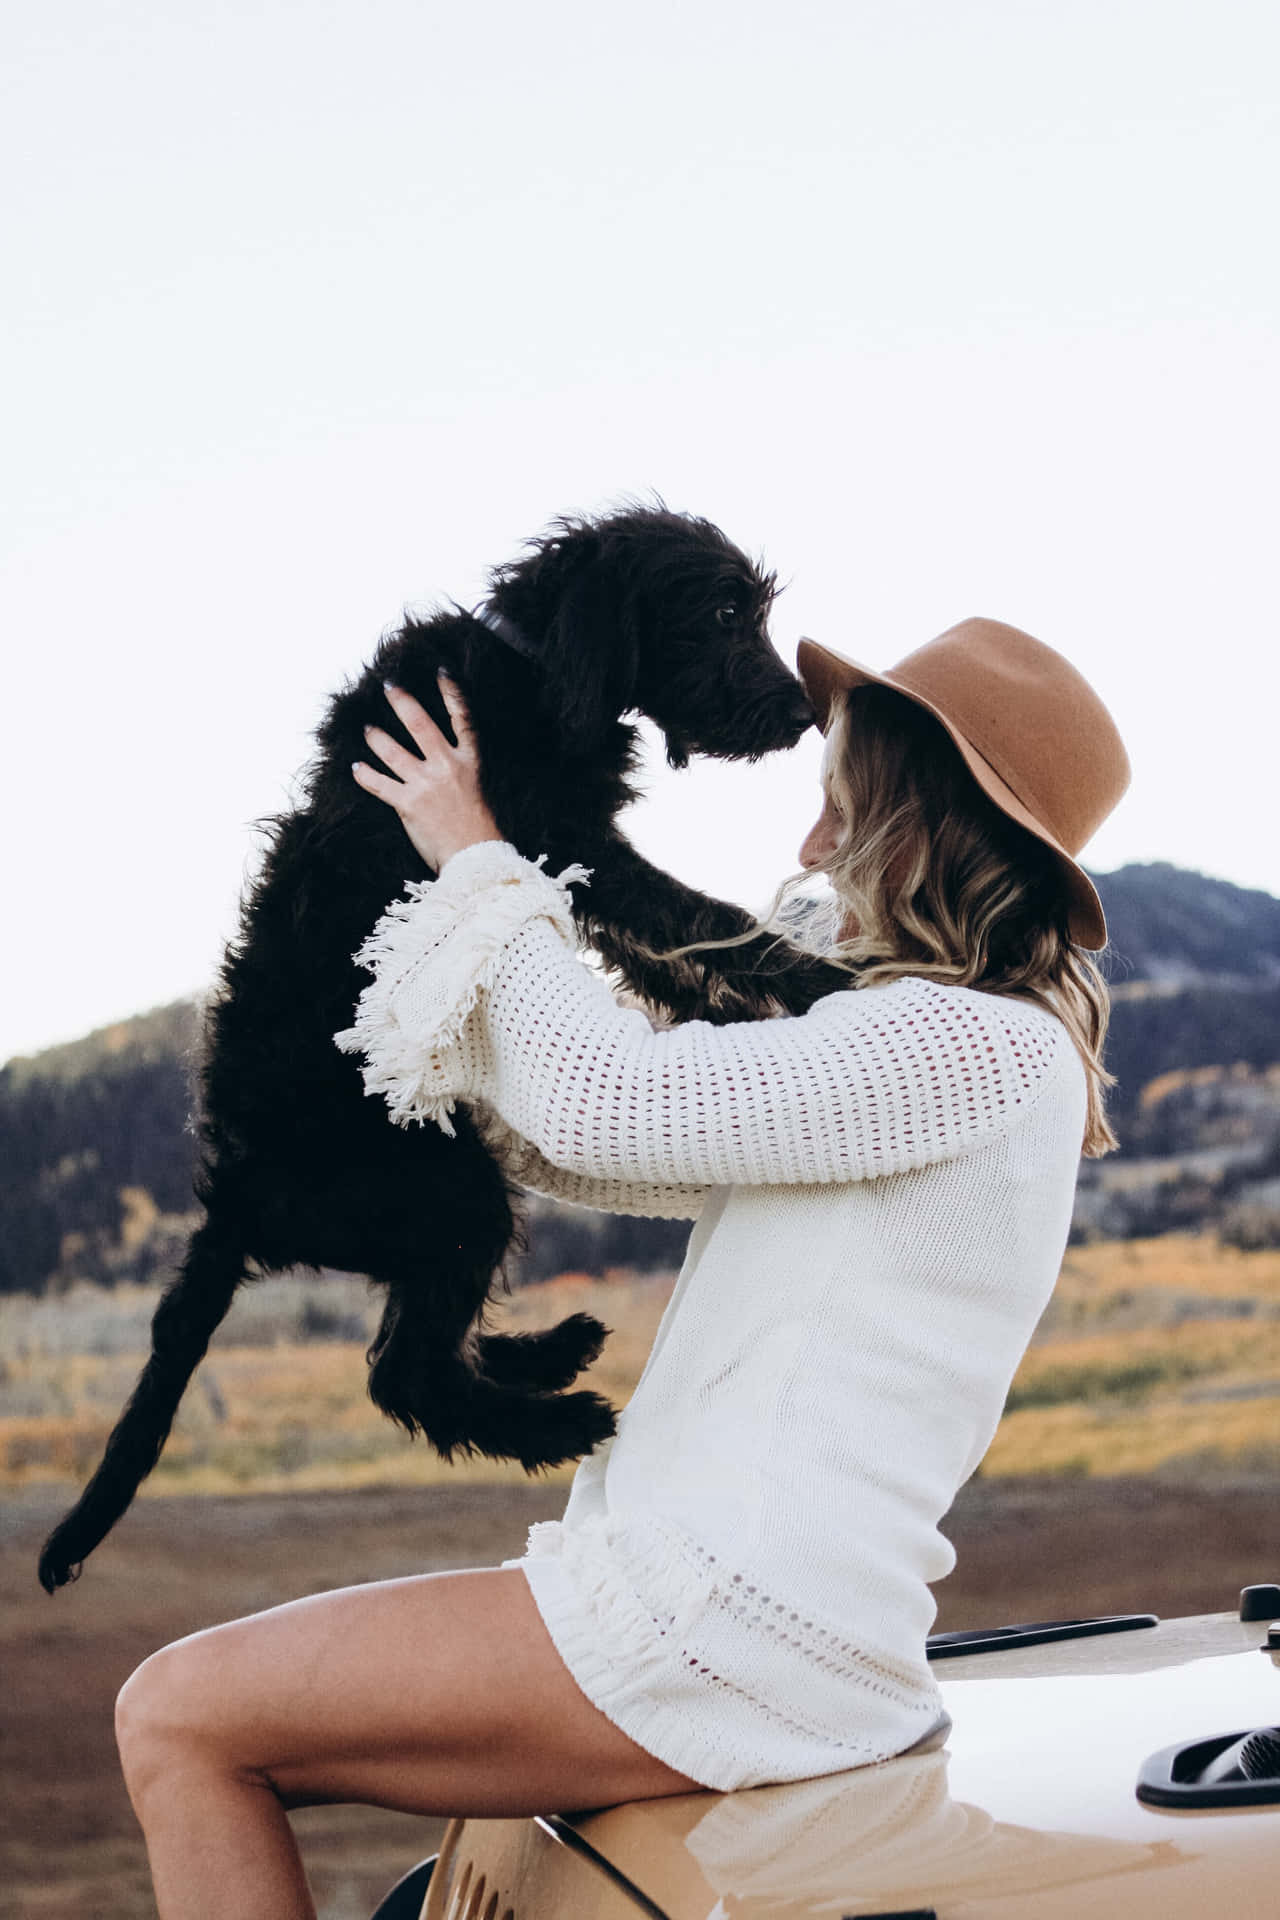 A Serene Moment Of Companionship Between A Woman And Her Dog Wallpaper